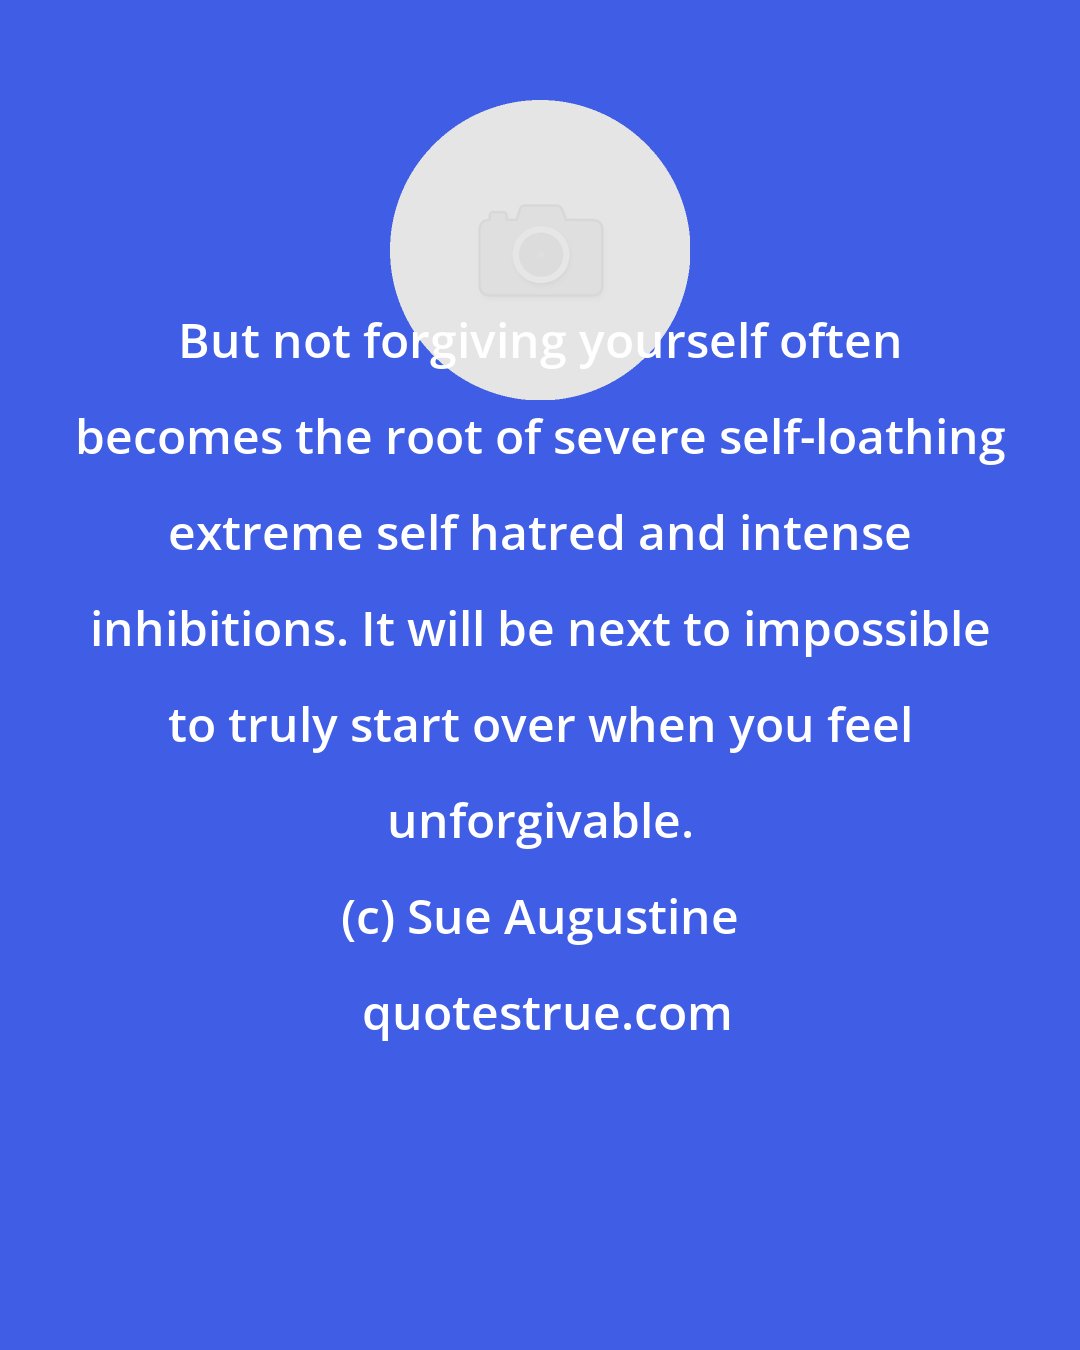 Sue Augustine: But not forgiving yourself often becomes the root of severe self-loathing extreme self hatred and intense inhibitions. It will be next to impossible to truly start over when you feel unforgivable.